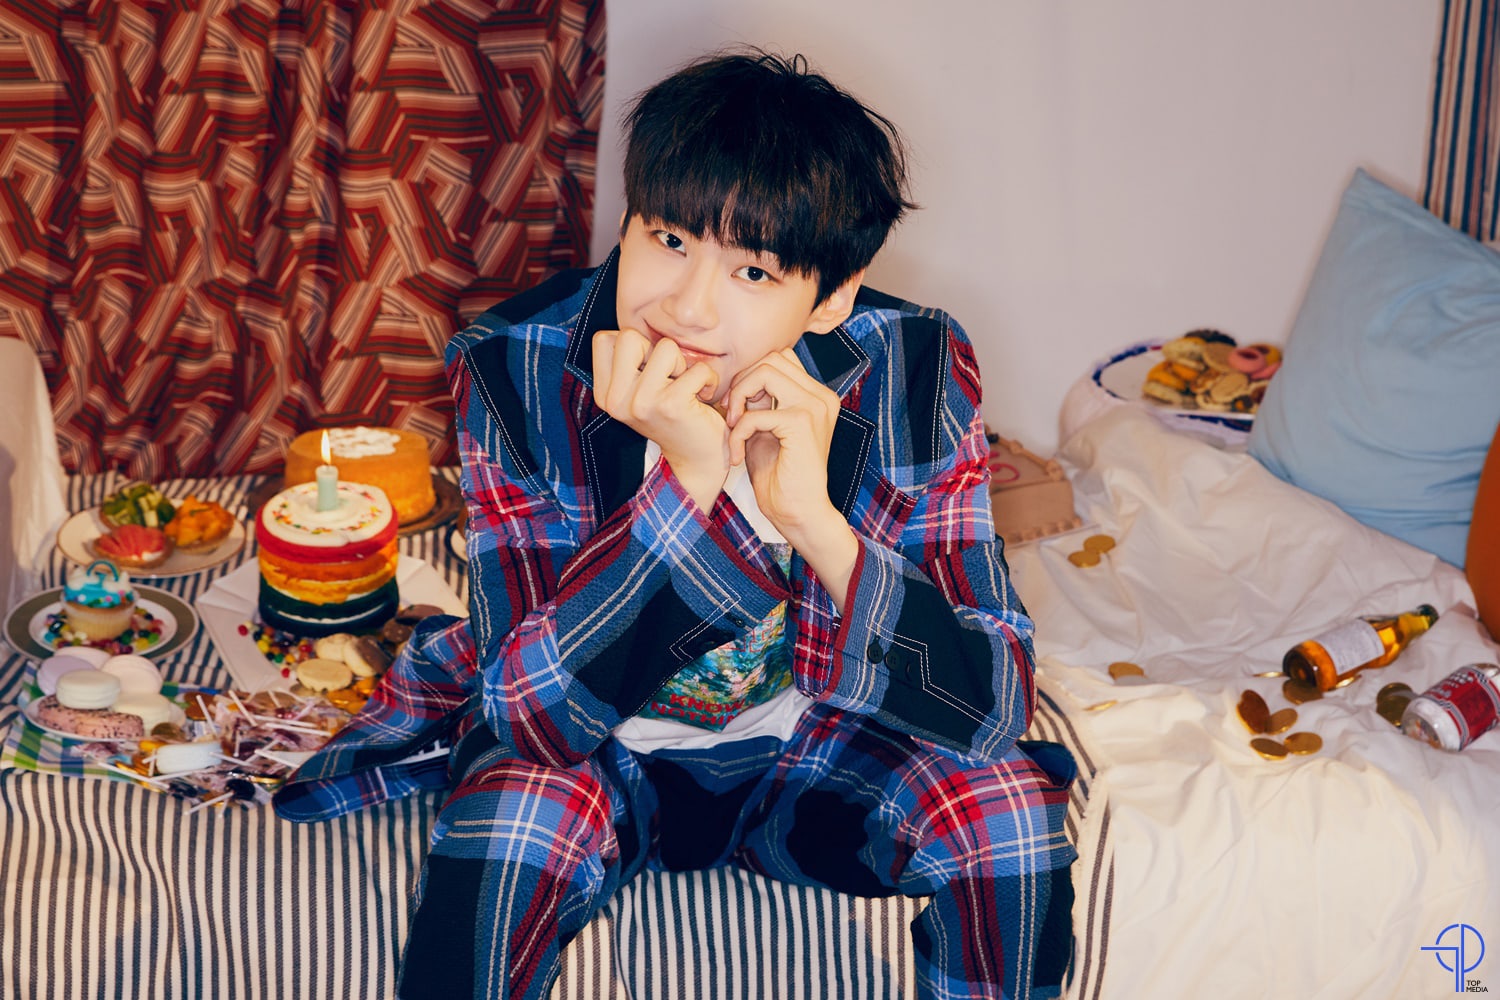 lee-jin-hyuk-talks-about-his-new-album-and-more-1